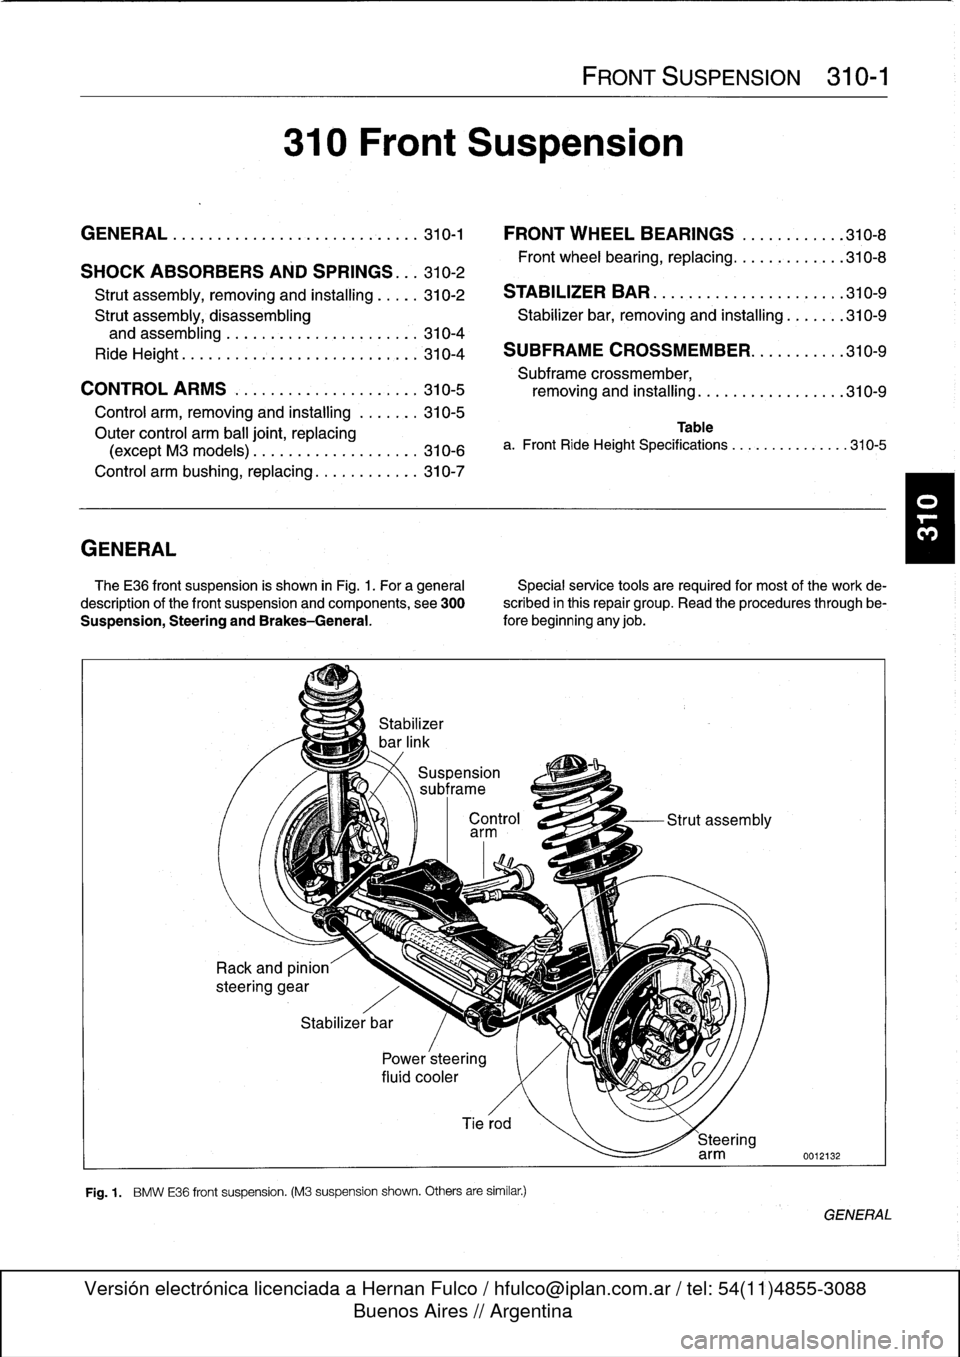 BMW 323i 1995 E36 Owners Manual 
GENERAL

310
Front
Suspension

GENERAL
..
.
.
.
.
.
.
.
.
.
.......
.
........
.
310-1

	

FRONT
WHEEL
BEARINGS
..
.
.
.
.......
310-8

SHOCK
ABSORBERS
AND
SPRINGS
..
.
310-2

	

Front
wheel
bearing,